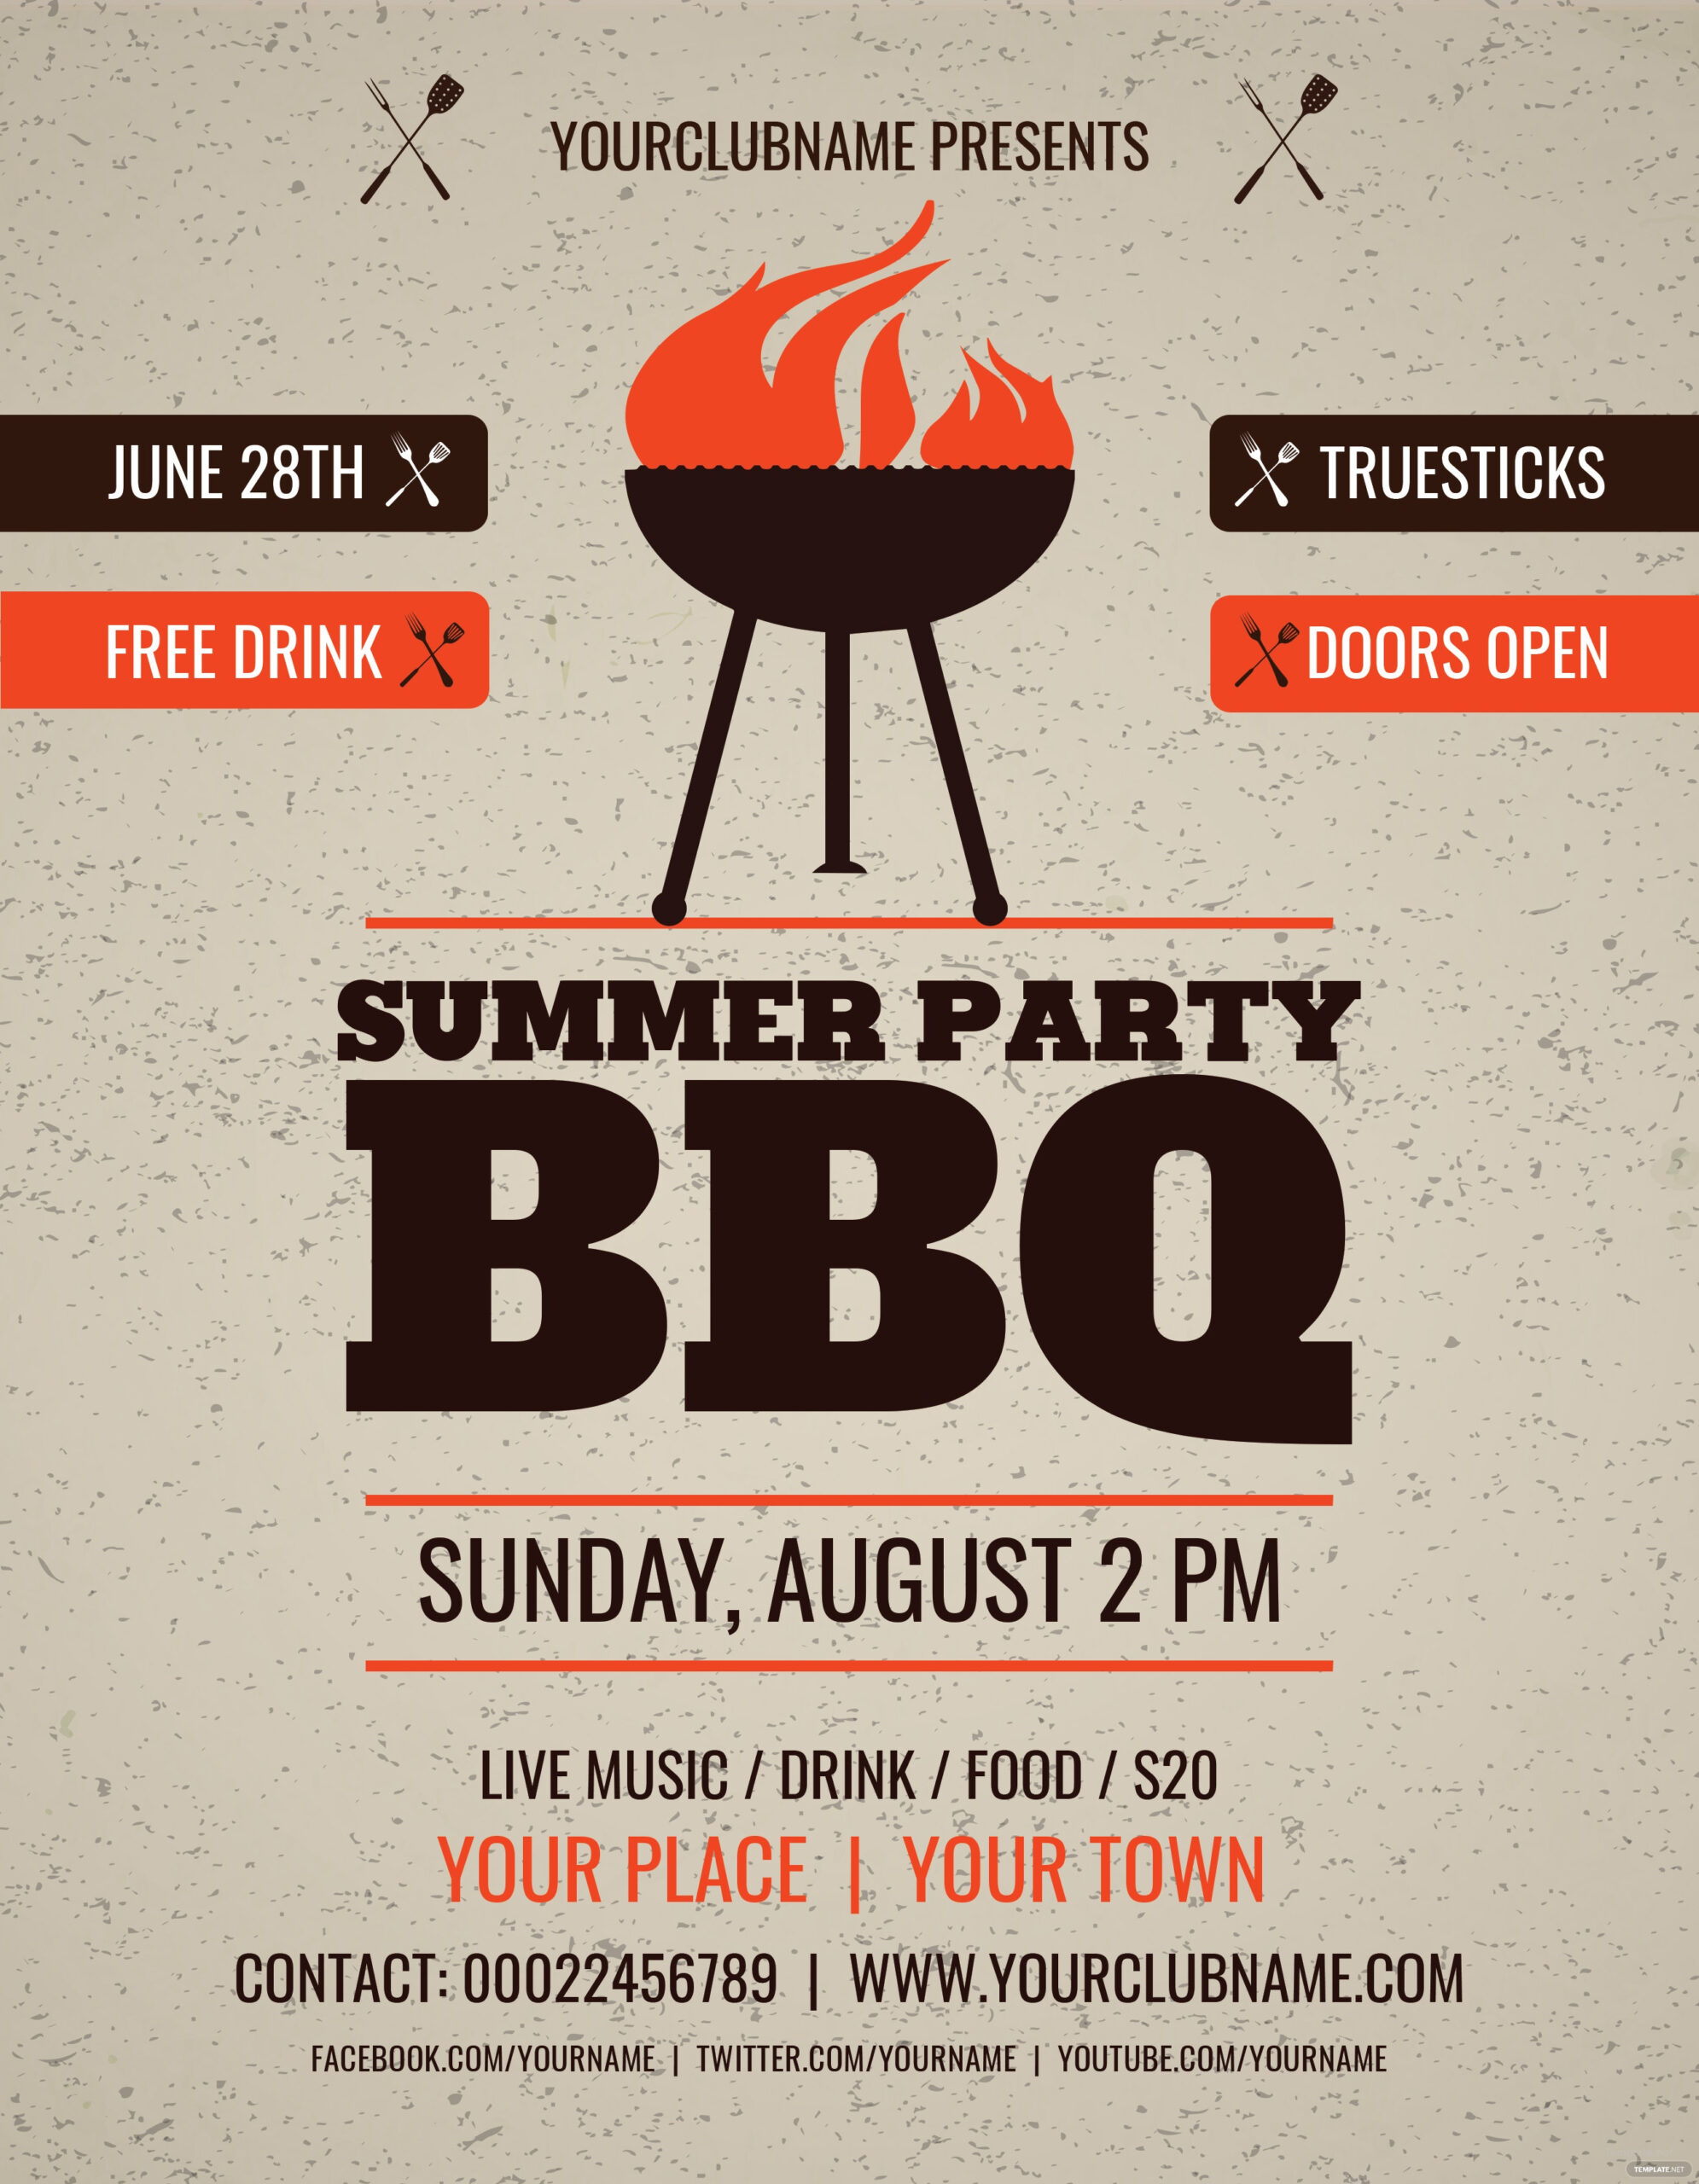 Free Summer Party BBQ Flyer Template In Adobe Photoshop Illustrator